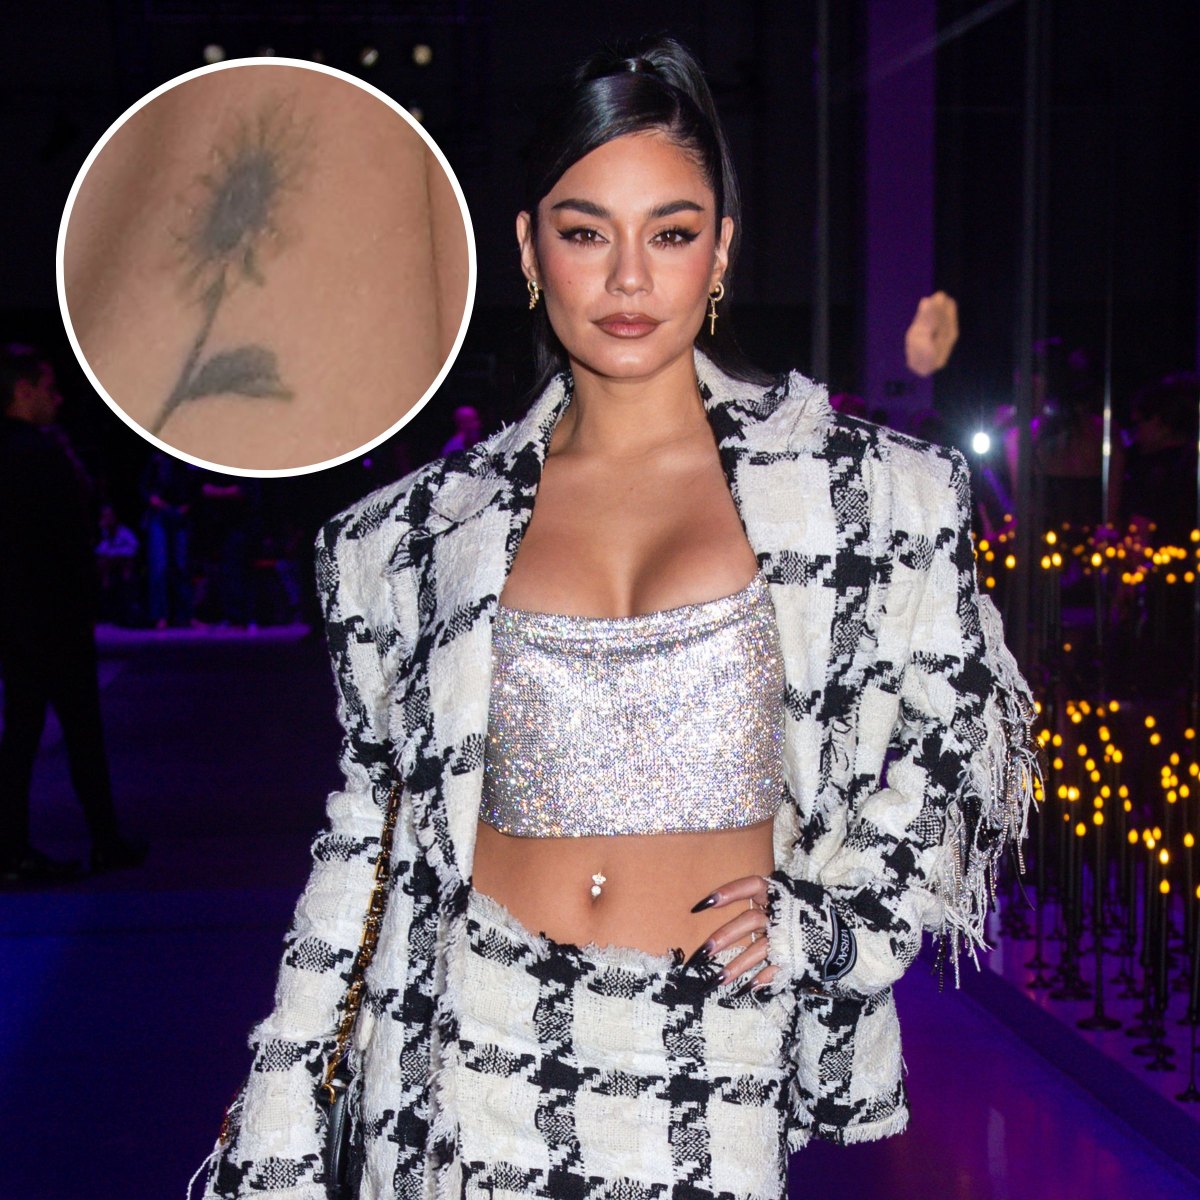 Vanessa Hudgens Tattoo Guide: Ink Designs, Meanings, Photos